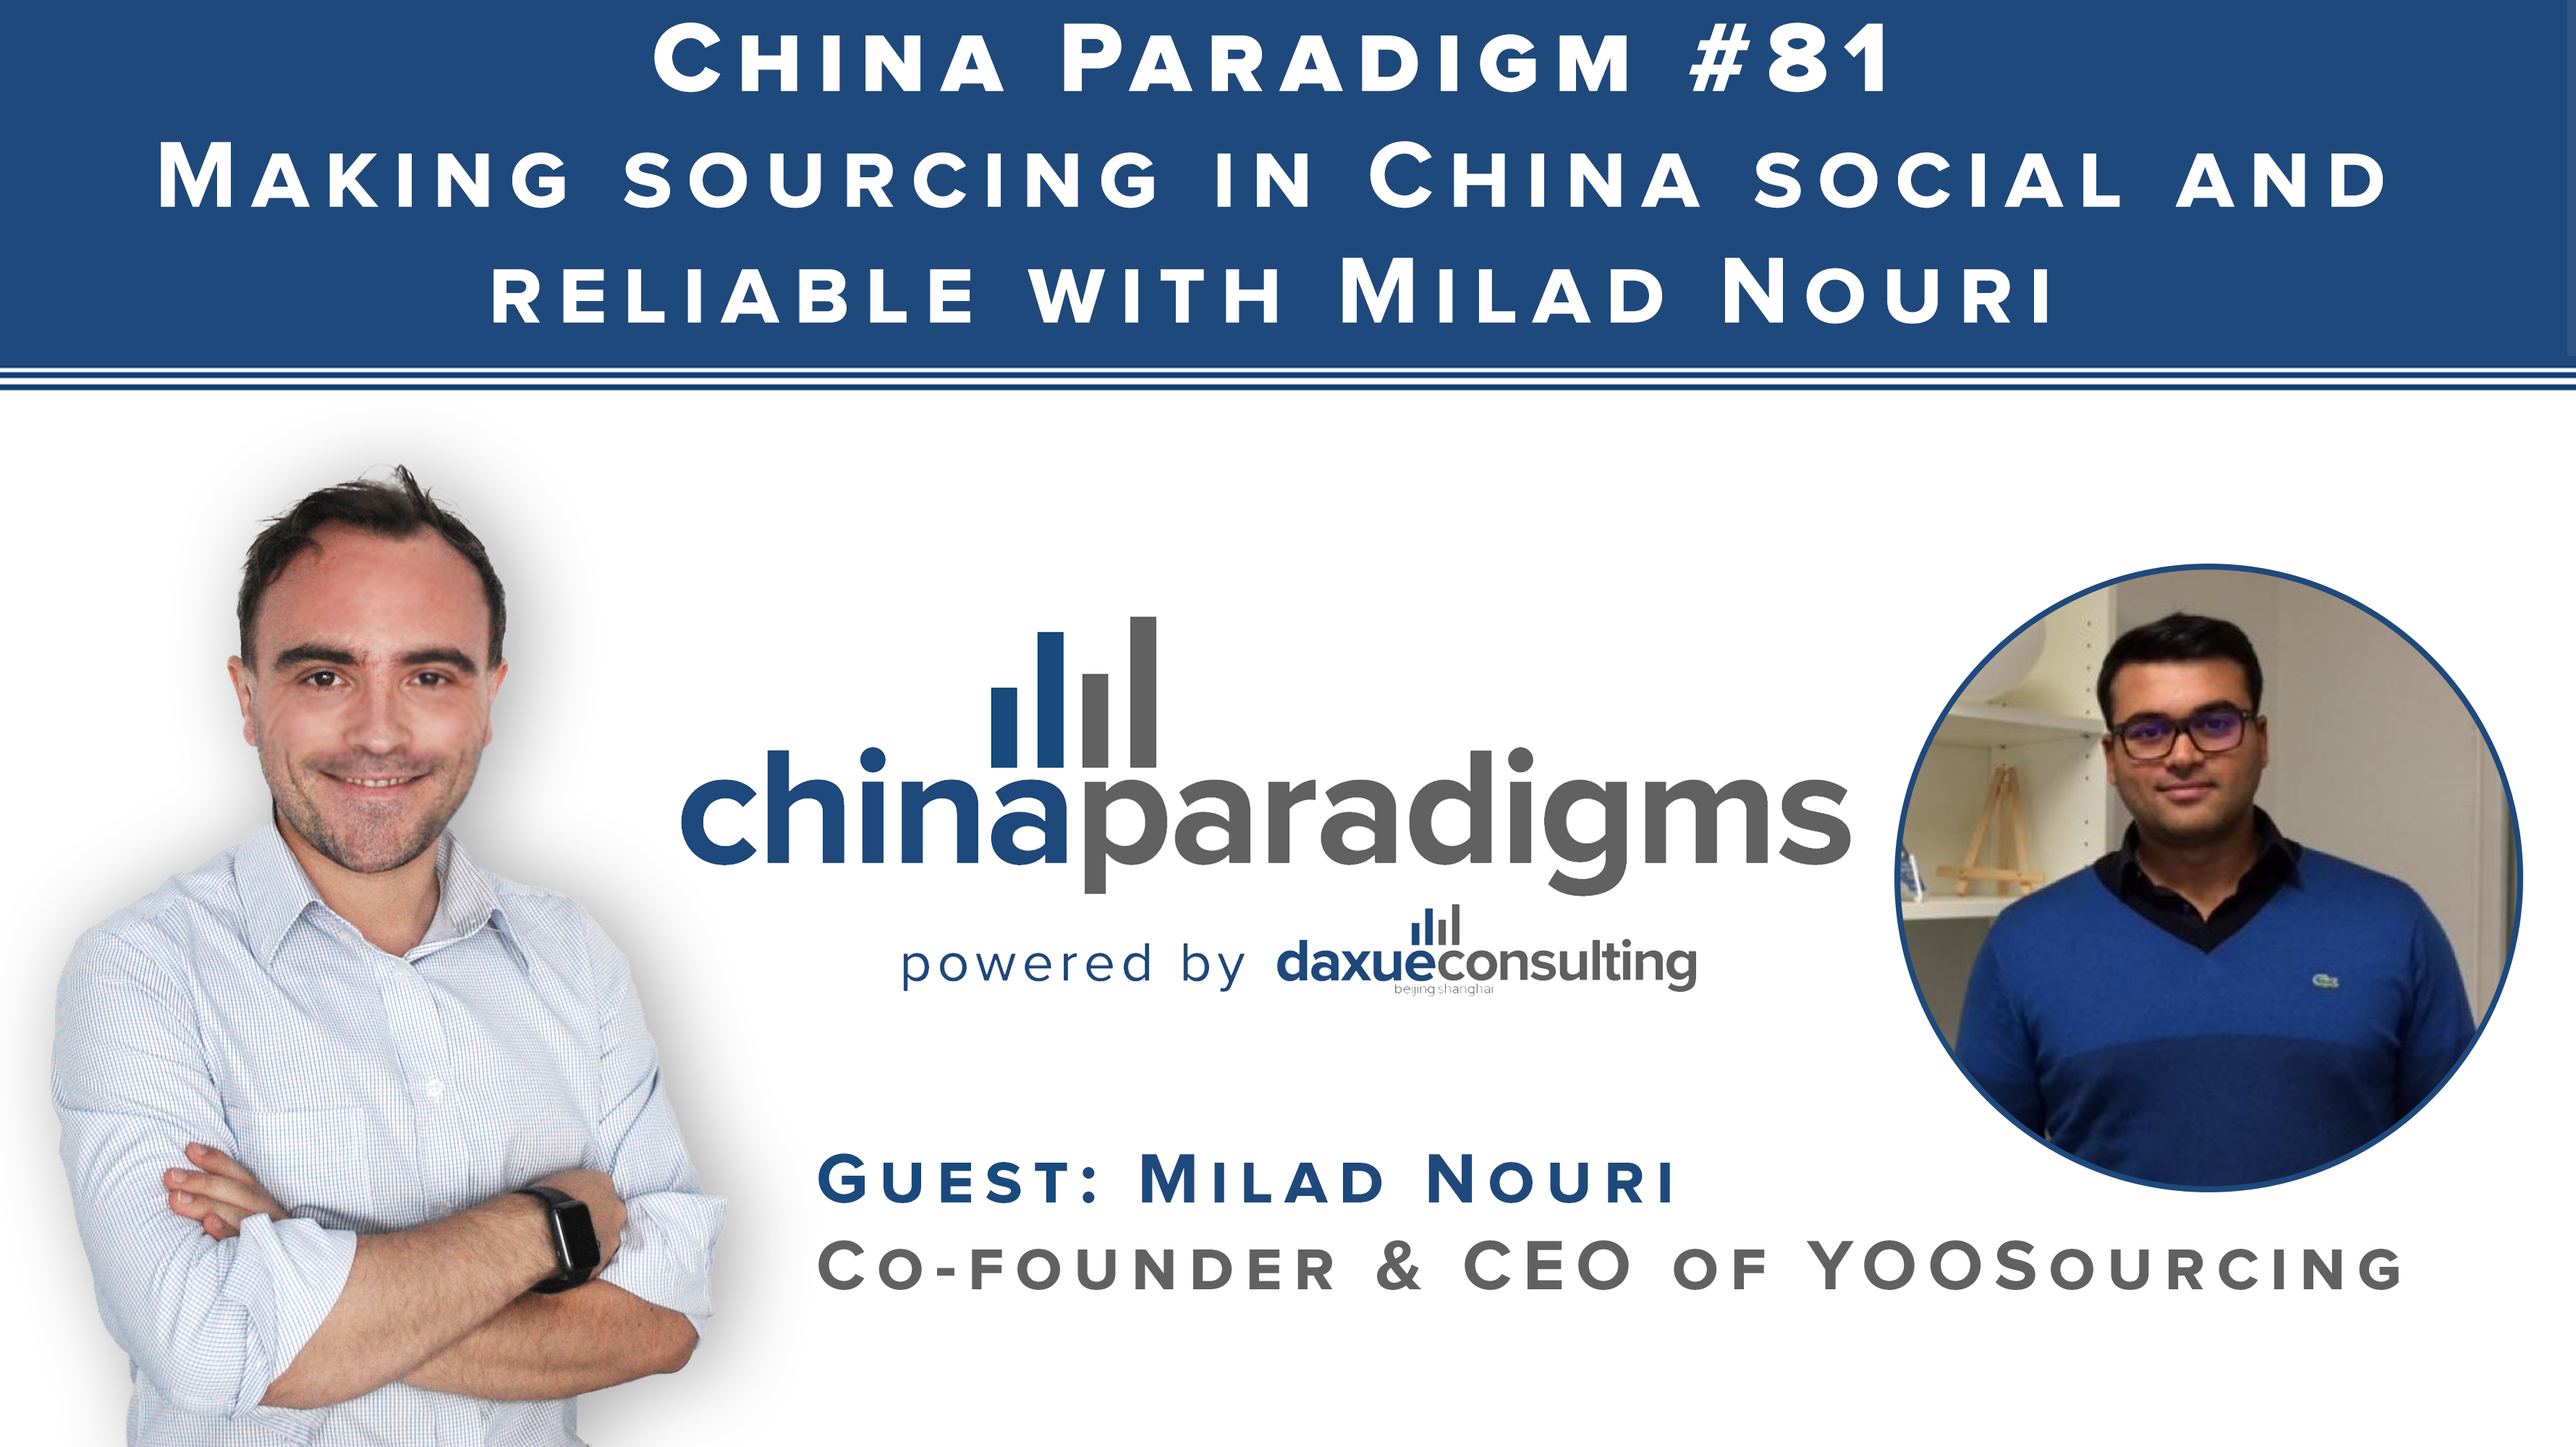 China Paradigm 81: Making global sourcing in China social and reliable with Milad Nouri